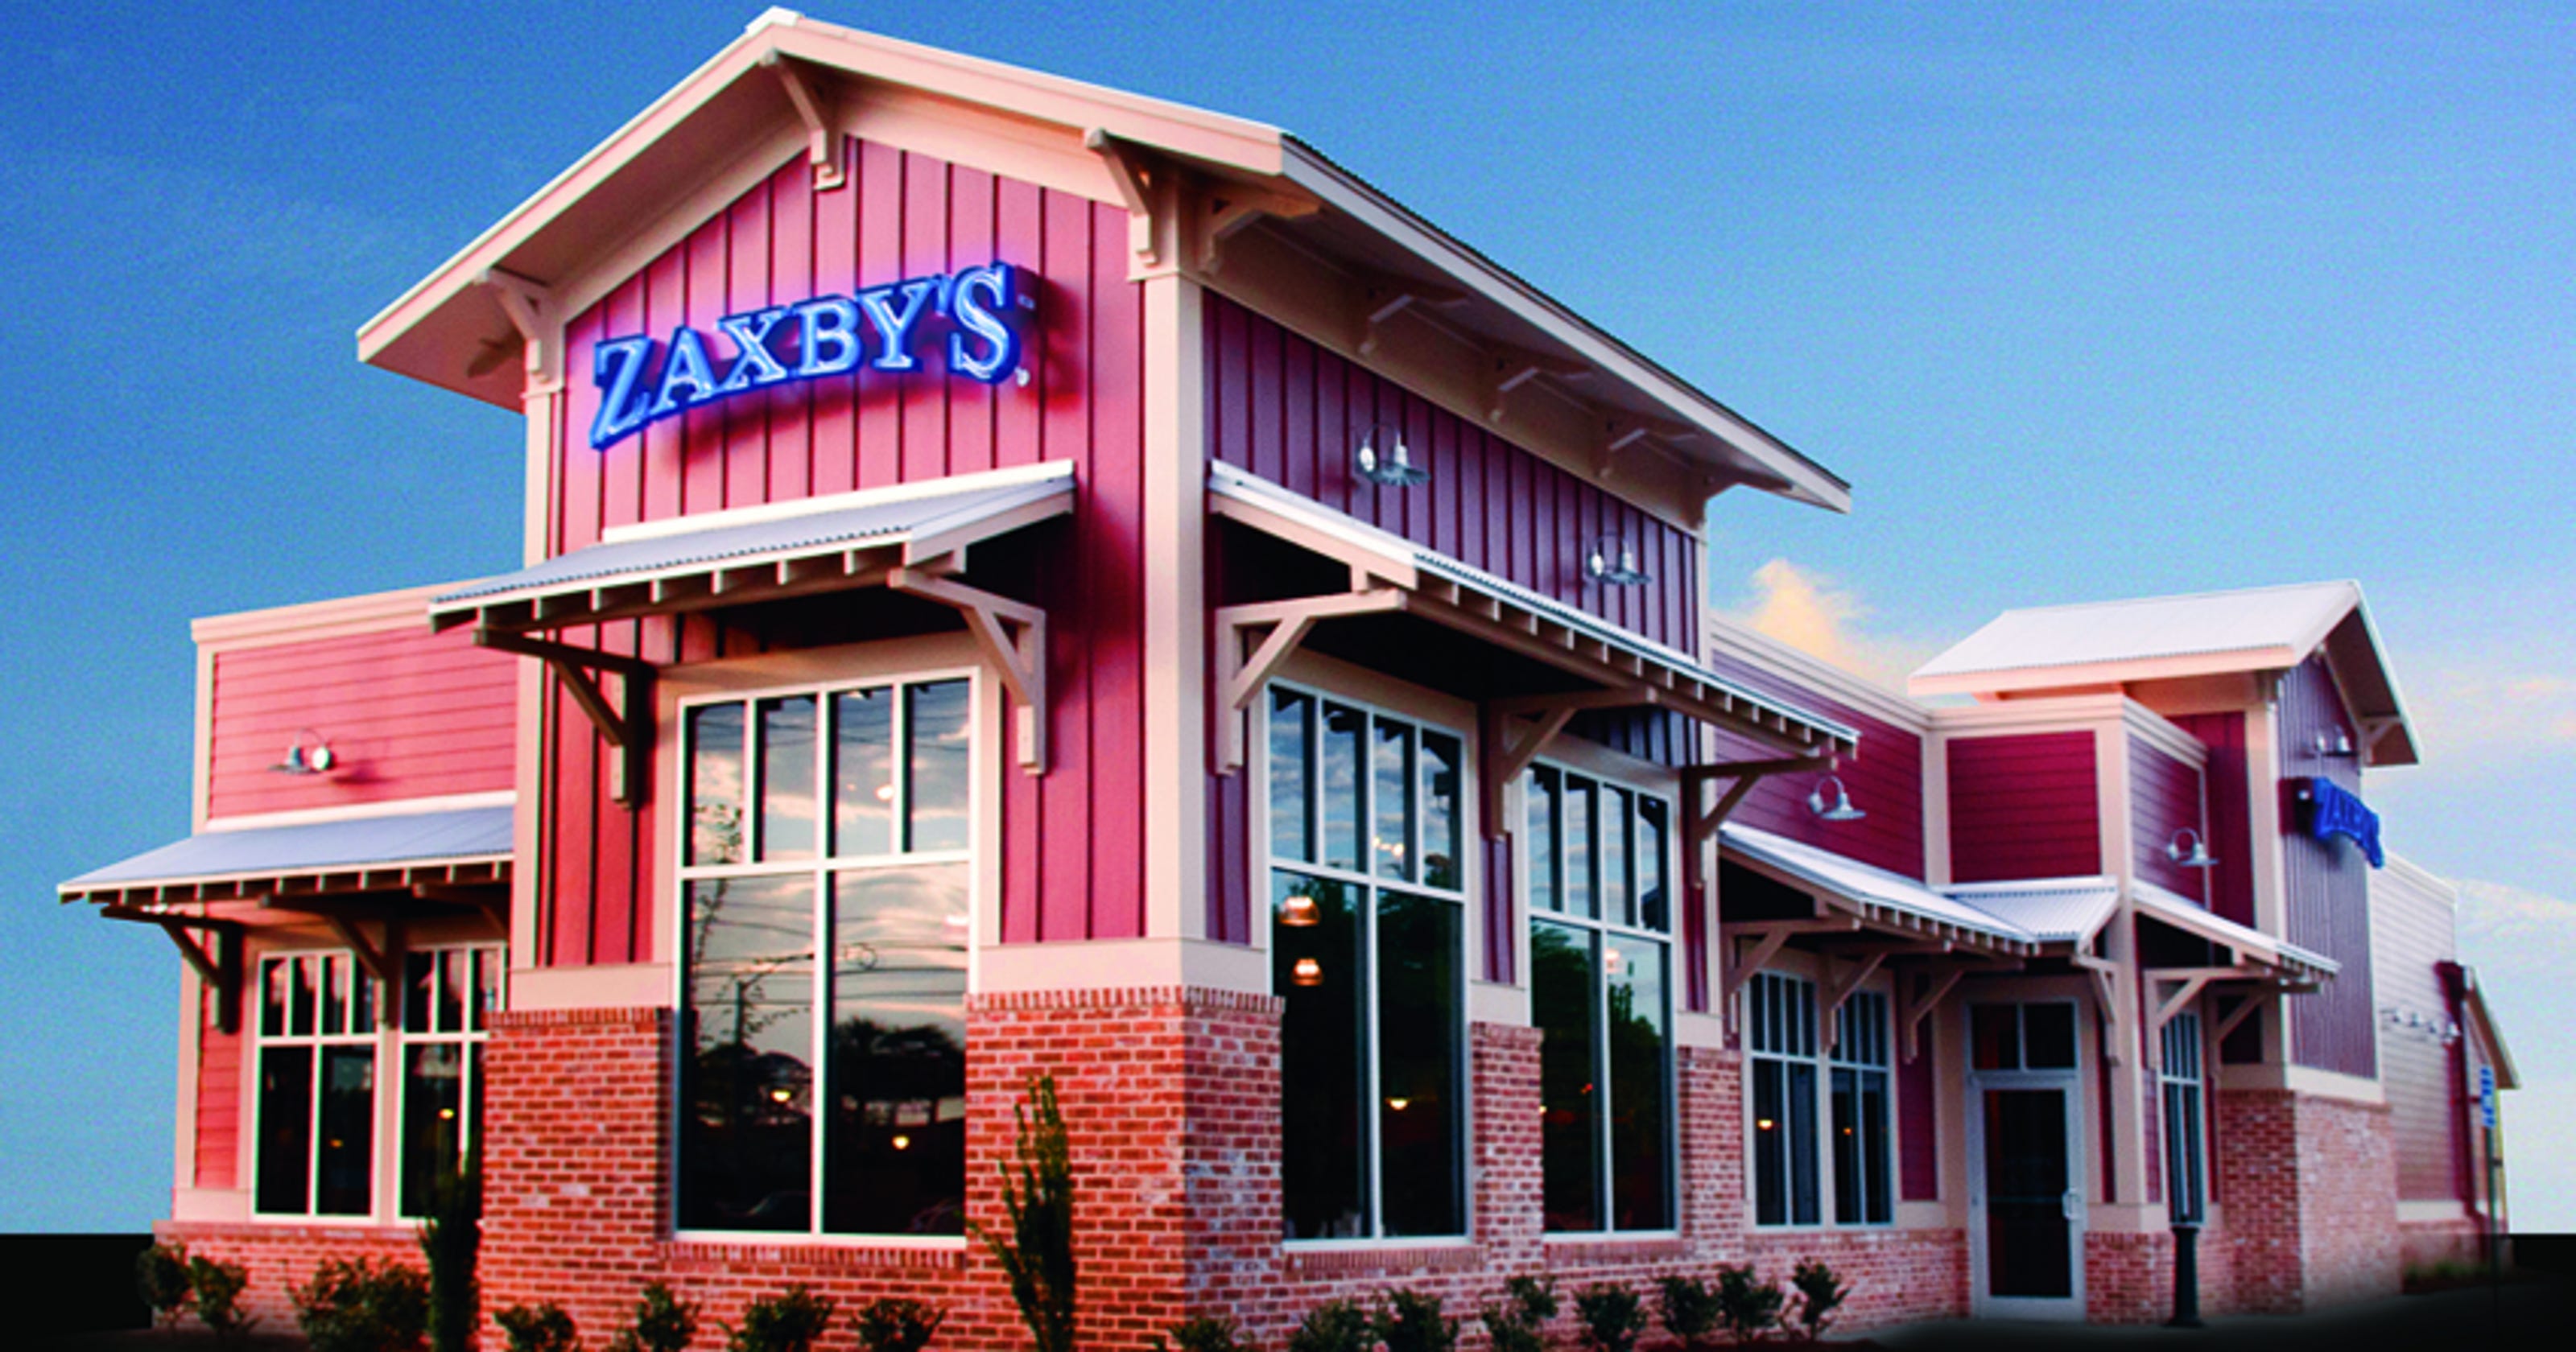 Zaxby’s, Mattress Firm coming to Rivergate area